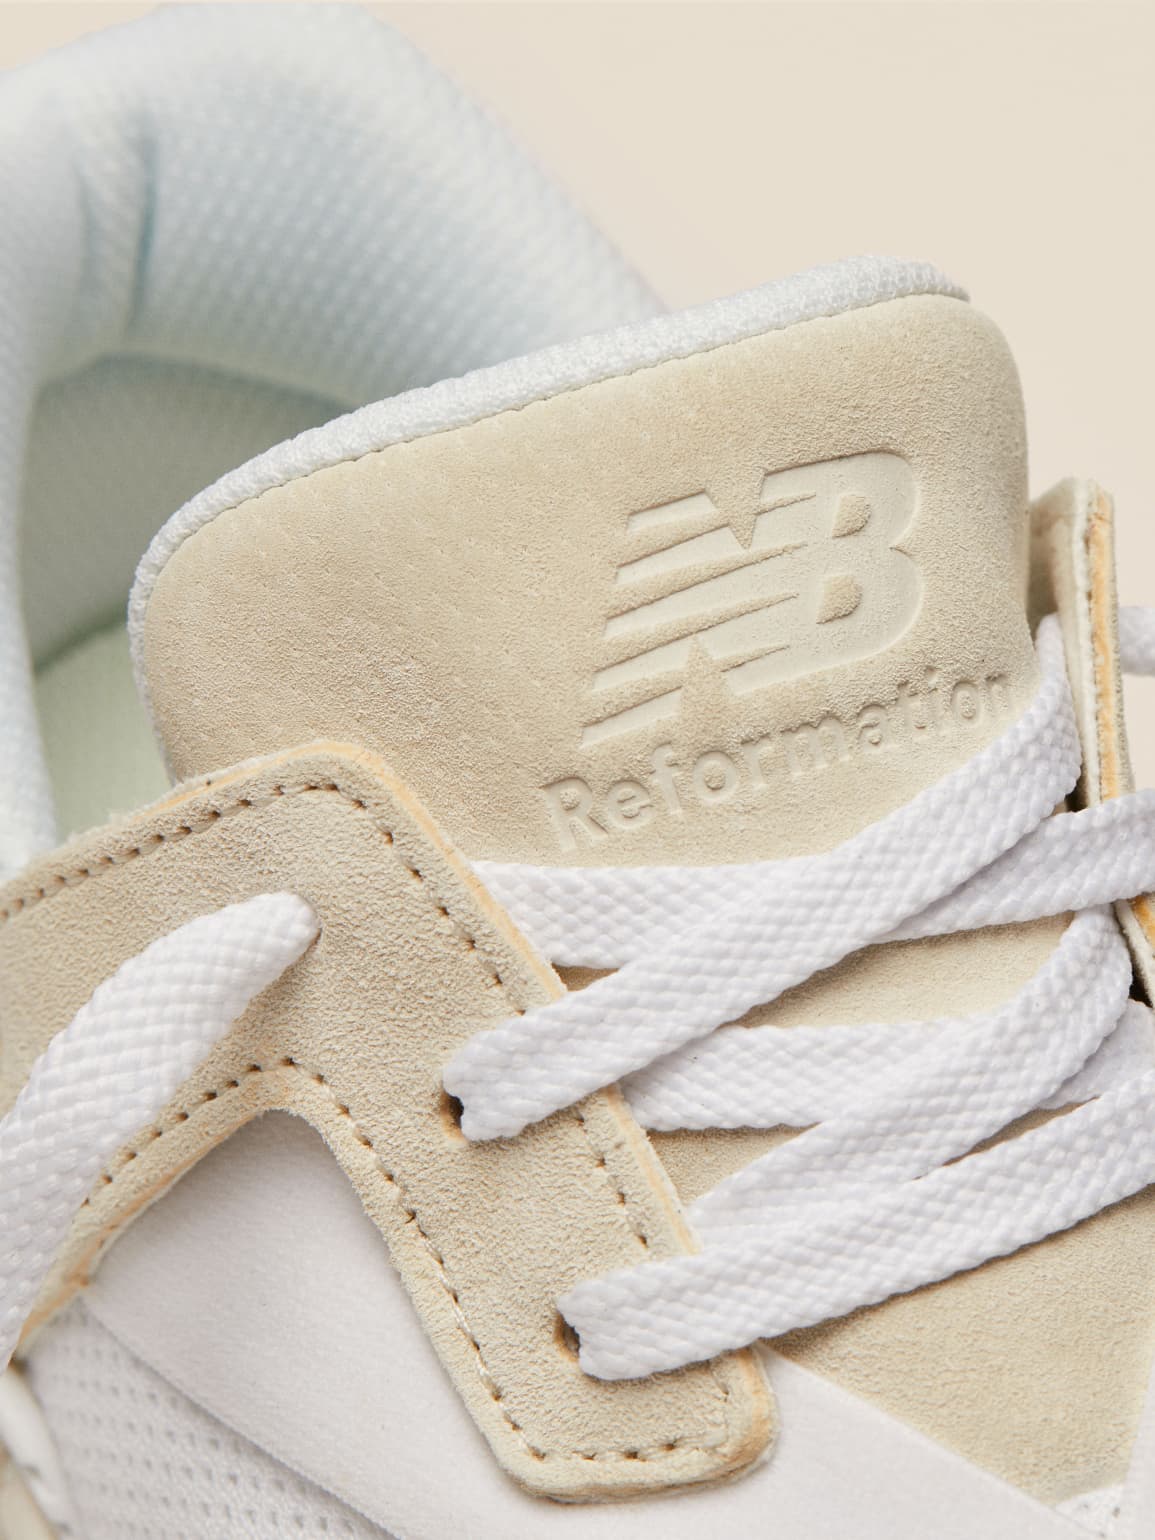 New Balance X Reformation 997W Sneakers detail